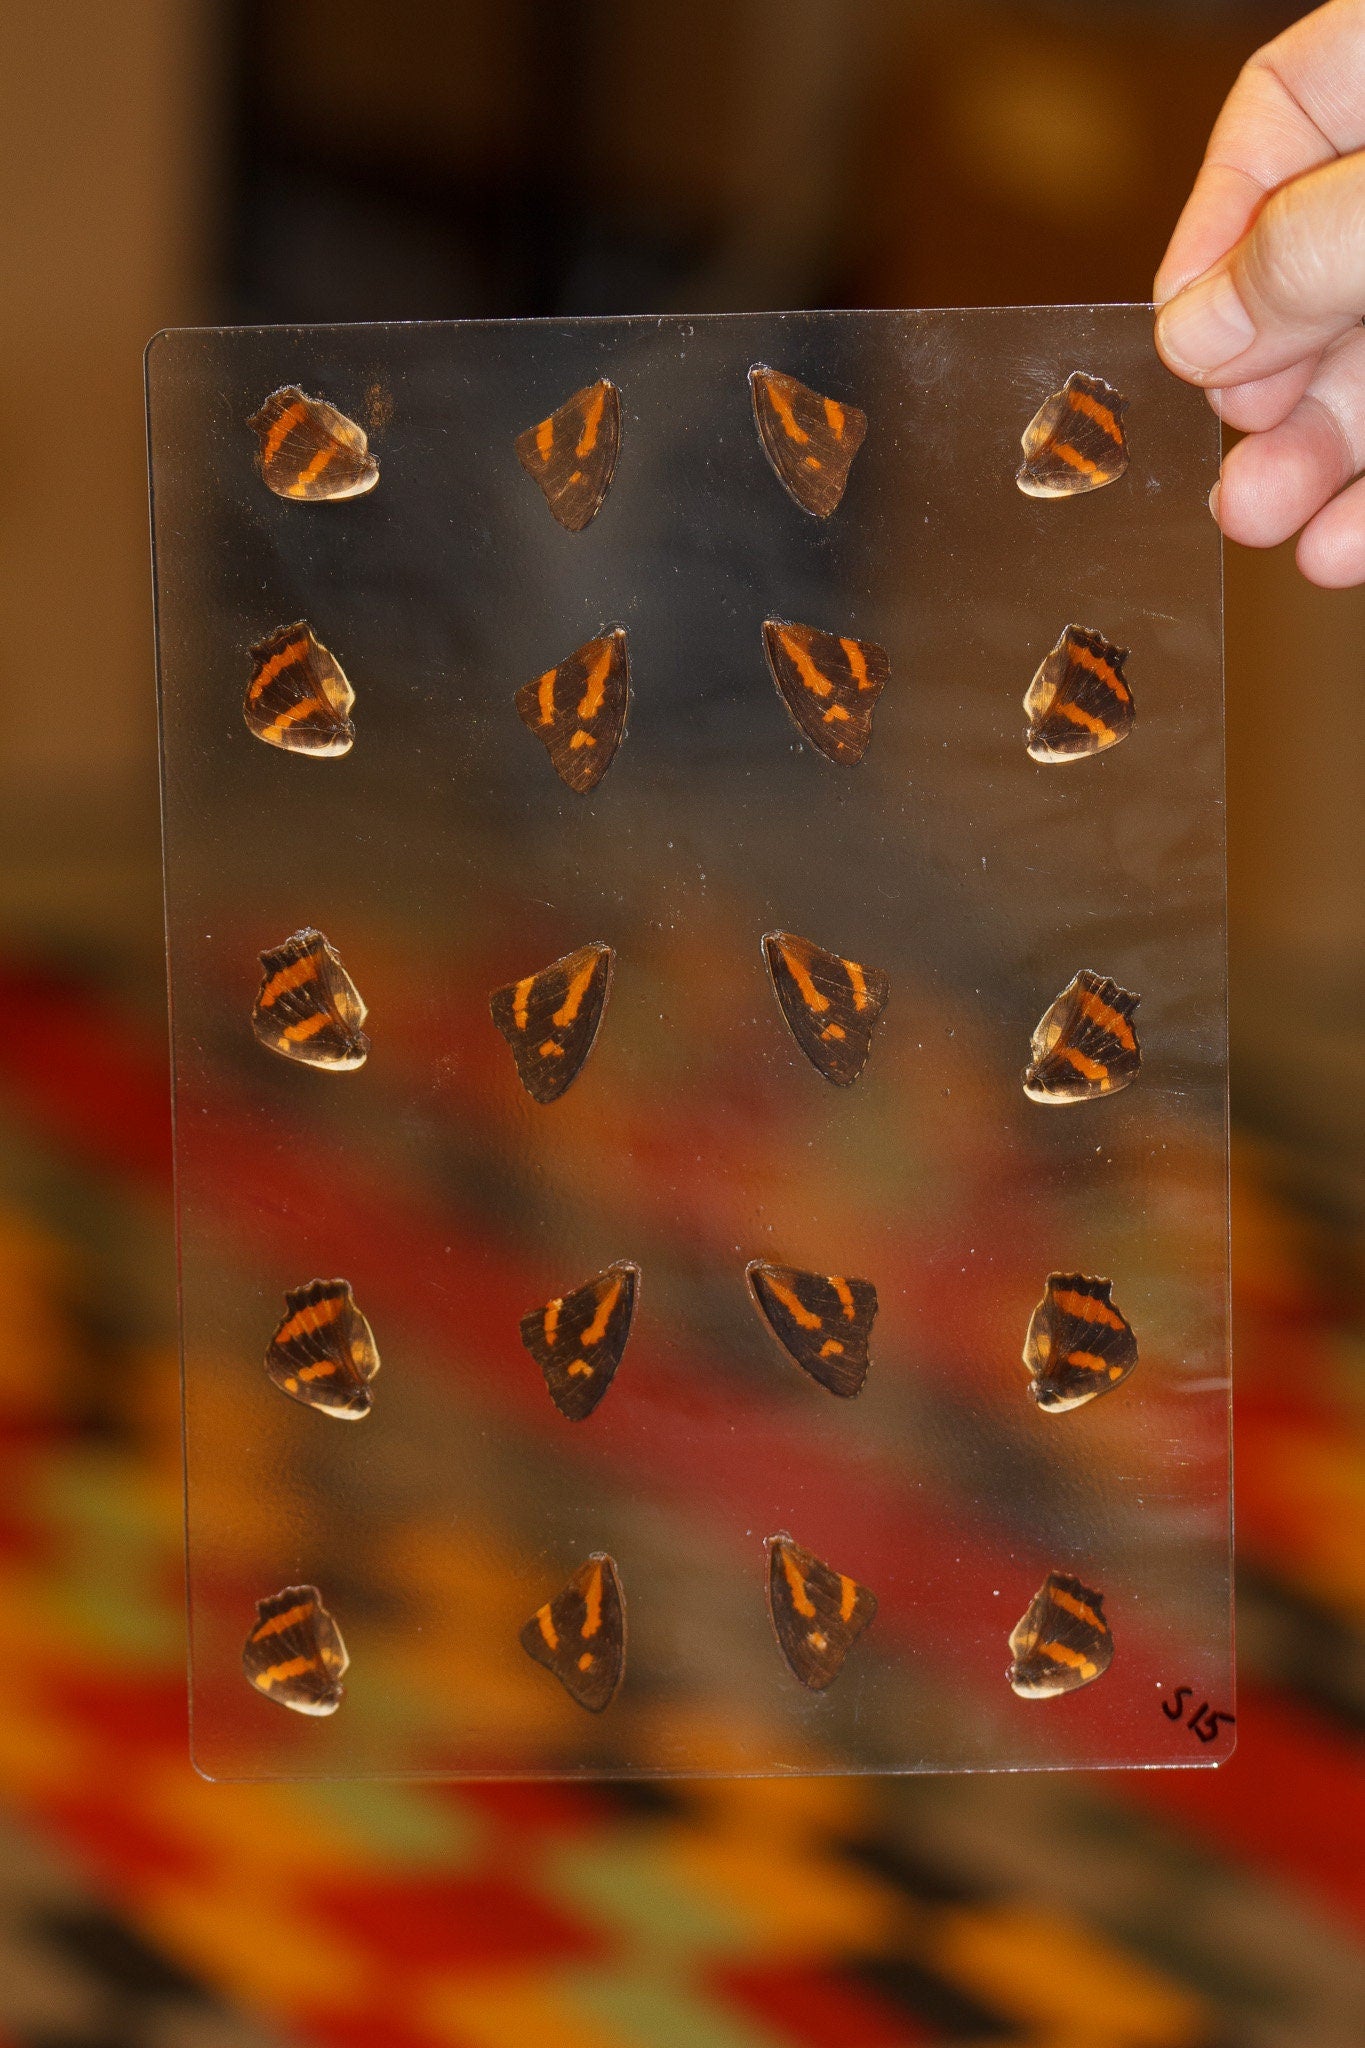 Butterfly Wings GLOSSY LAMINATED SHEET Real Ethically Sourced Specimens Moths Butterflies Wings for Art -- S15